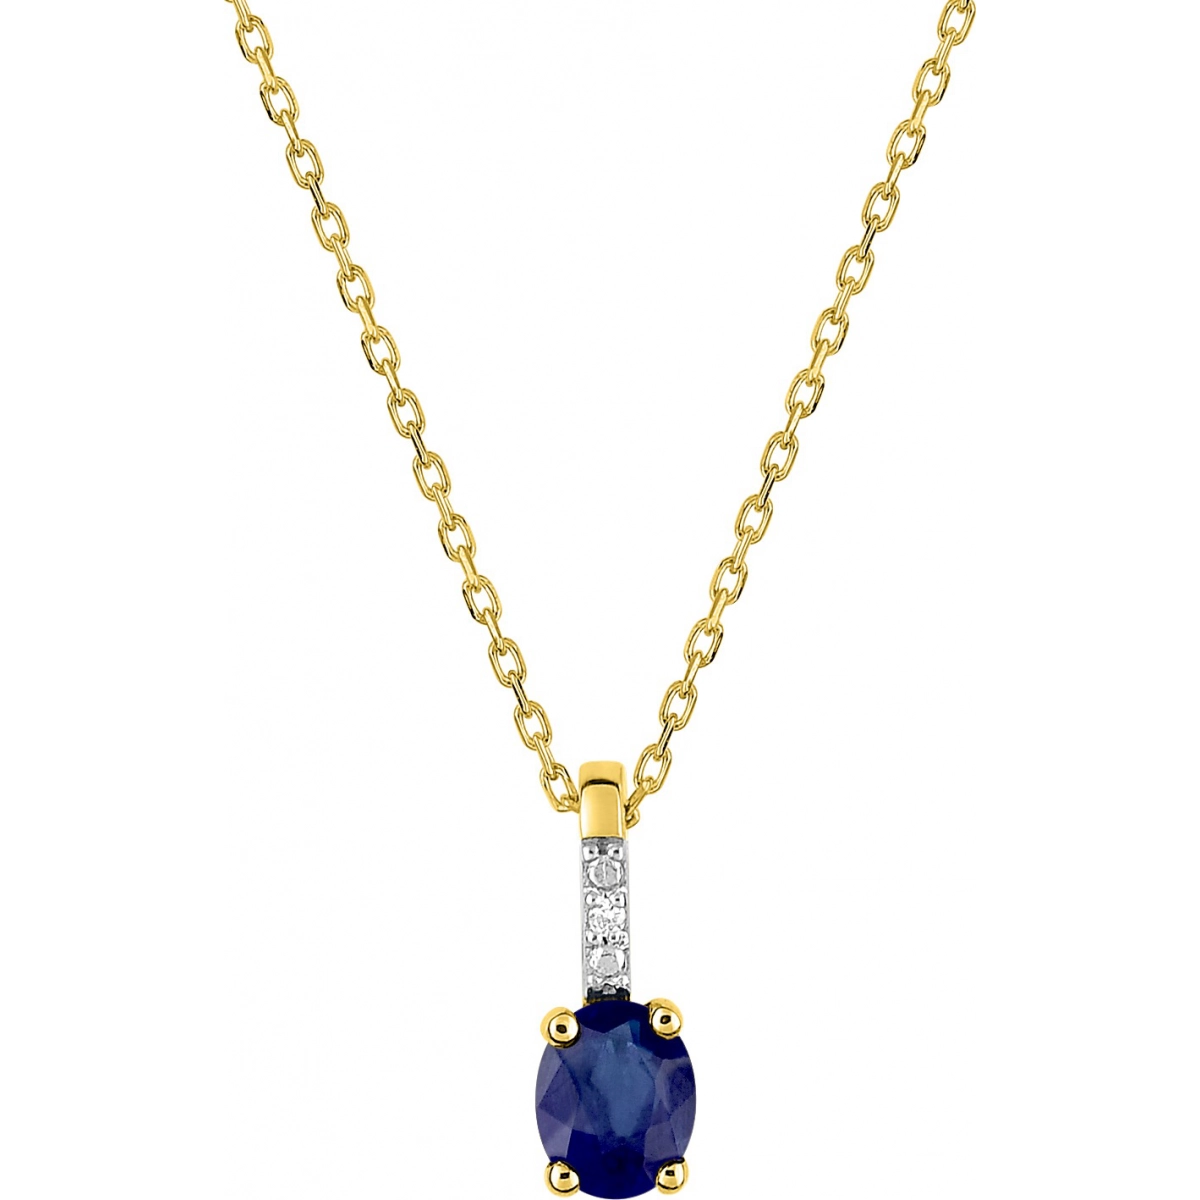 Necklace w. dia. 0.004Ct and sapphire 9K 2TG  Lua Blanca  5009BSTB4.0